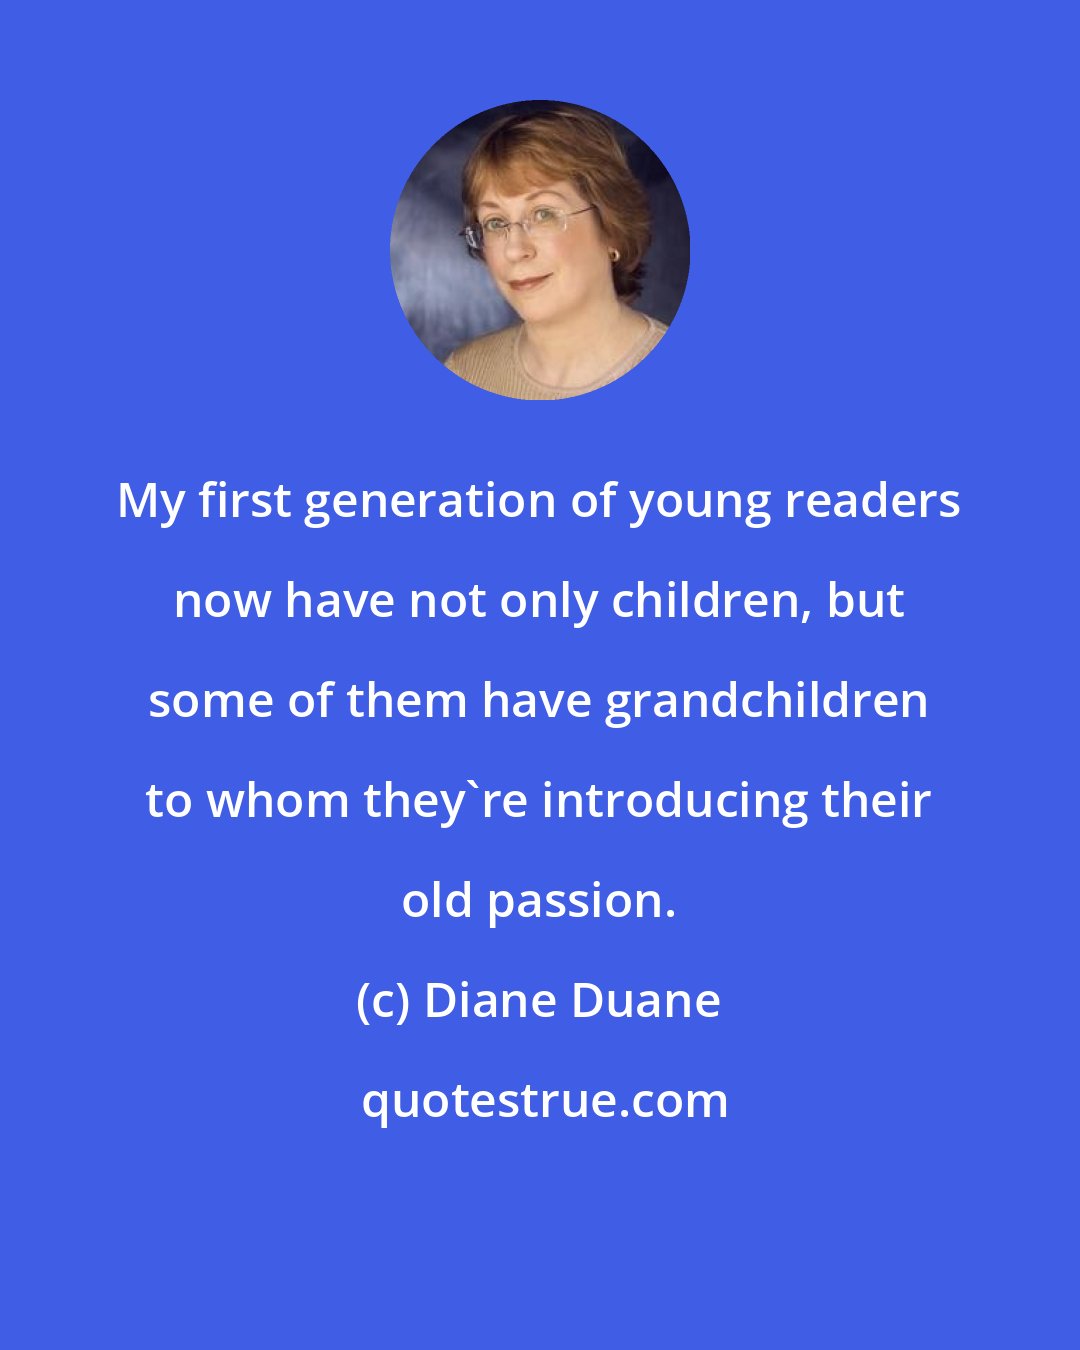 Diane Duane: My first generation of young readers now have not only children, but some of them have grandchildren to whom they're introducing their old passion.